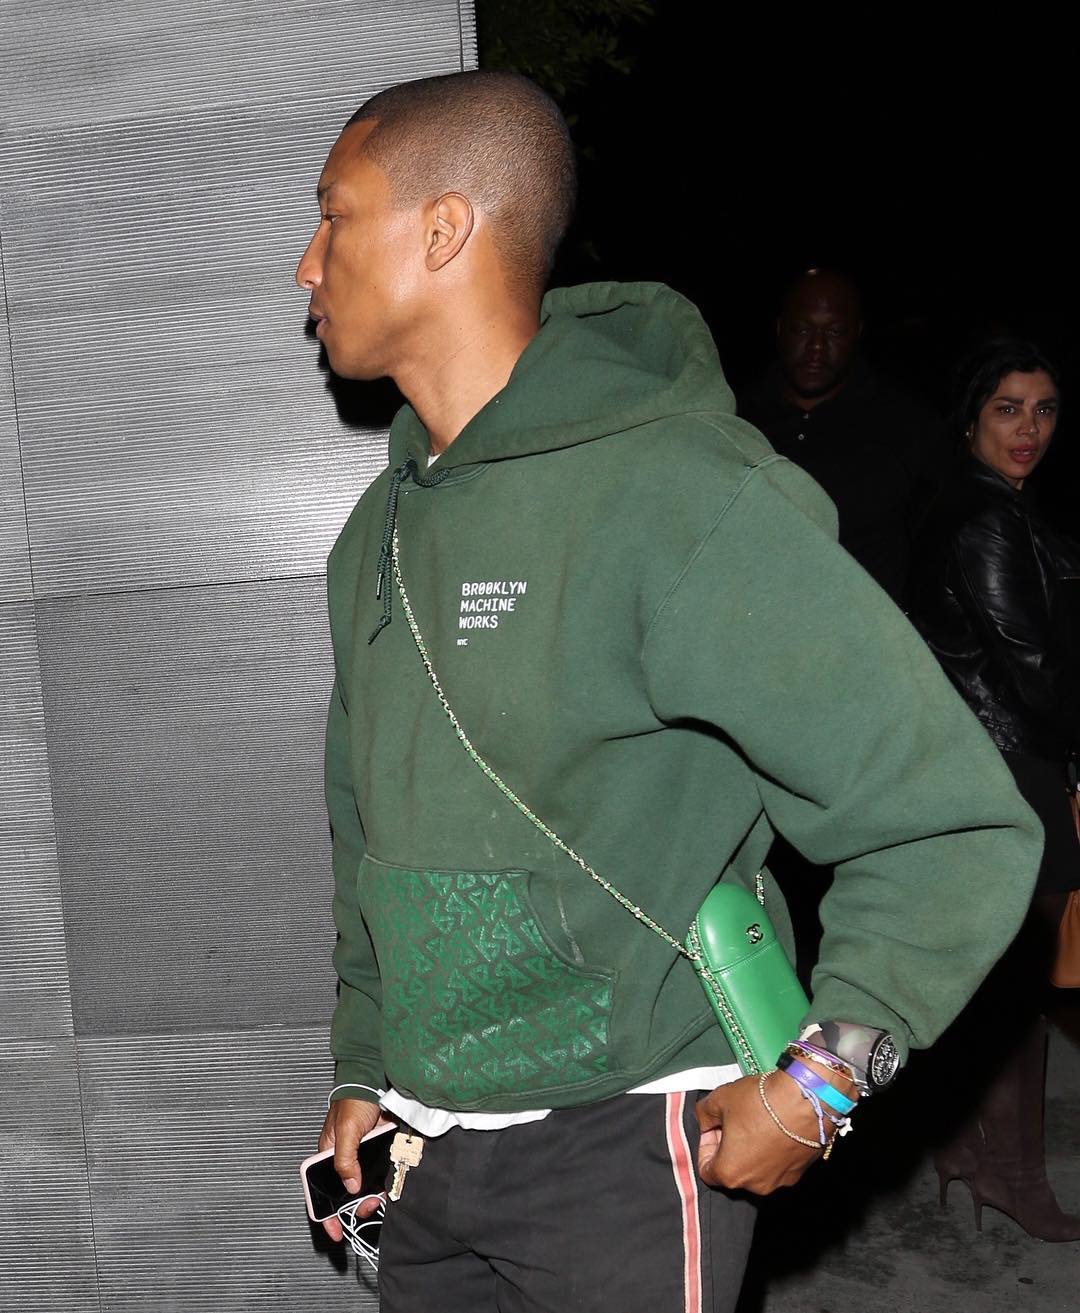 SPOTTED: Pharrell Williams In Brooklyn Machine Works Hoodie And Chanel Bag